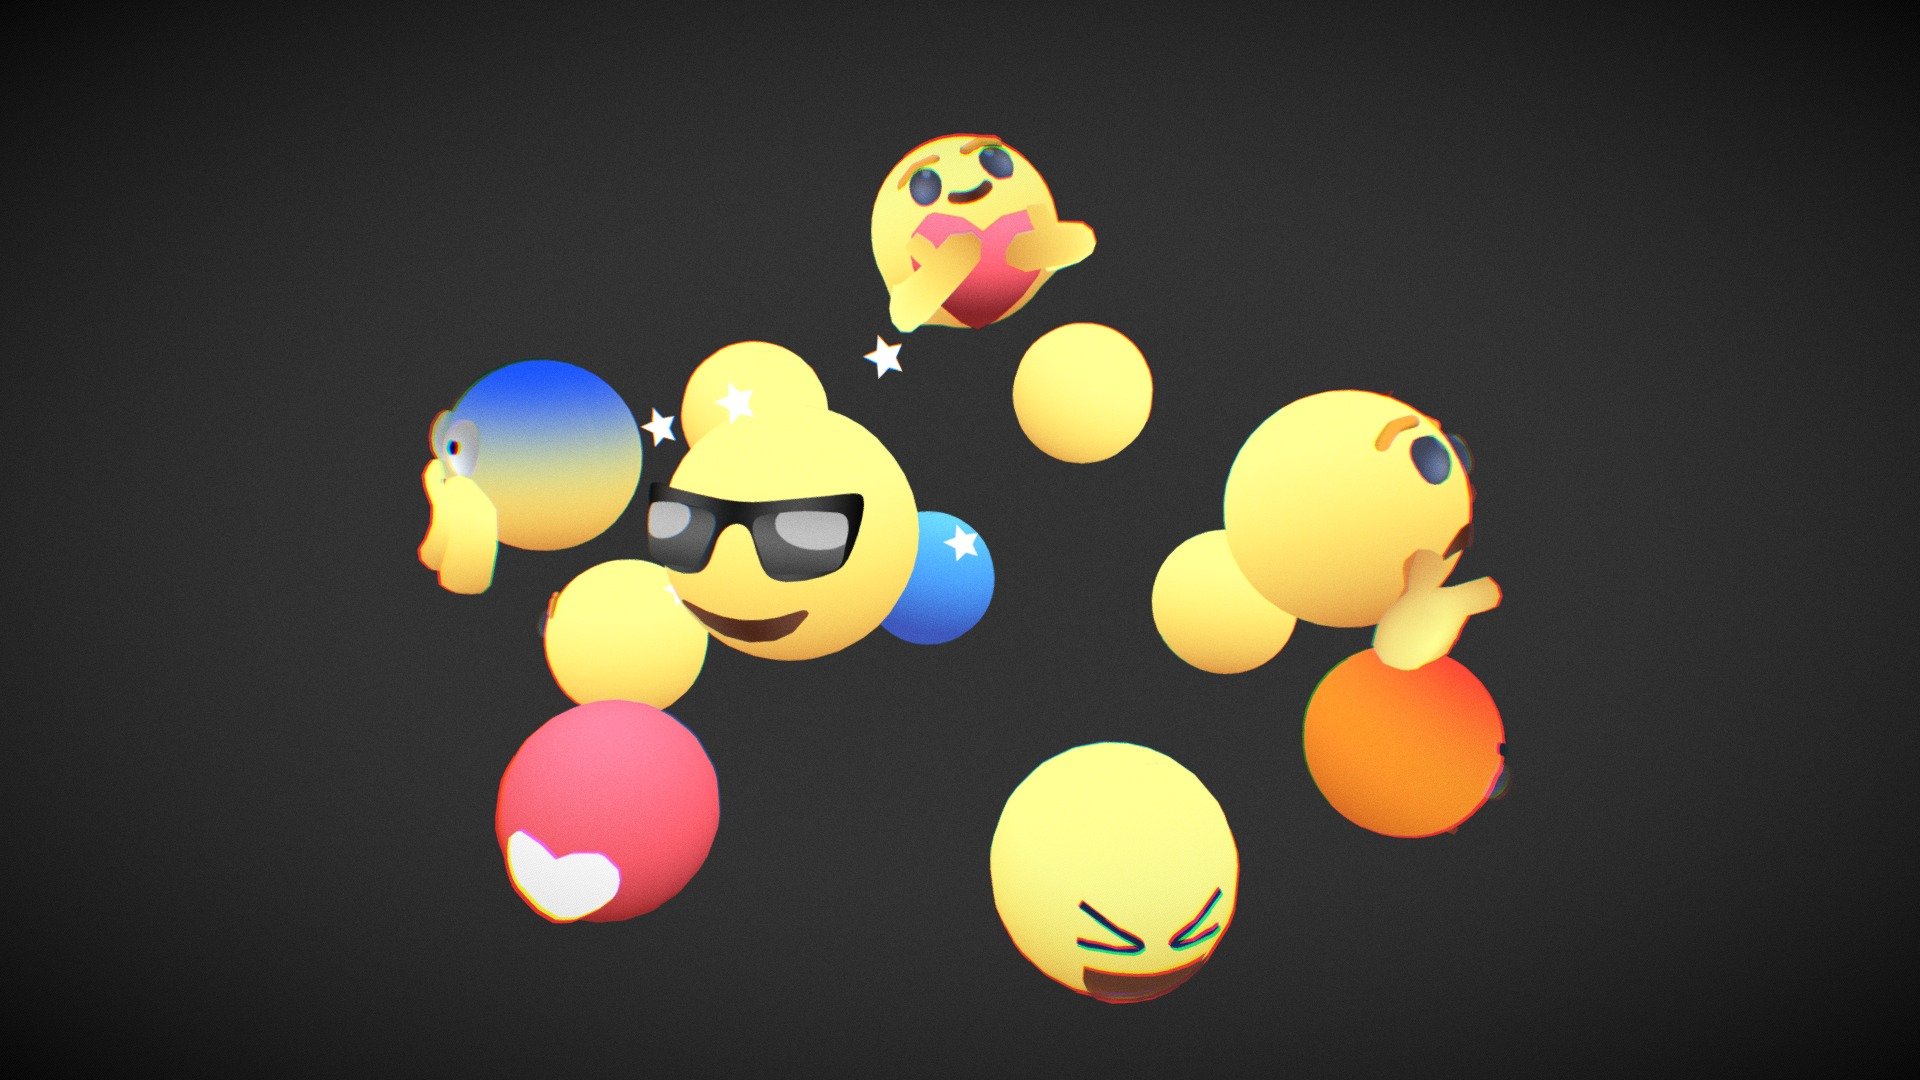 Animated Emojis package, 12 popular emoticons with loop animation, master control to move each Emoji individually, pre-set animations - Emojis - Buy Royalty Free 3D model by quetzal16 3d model